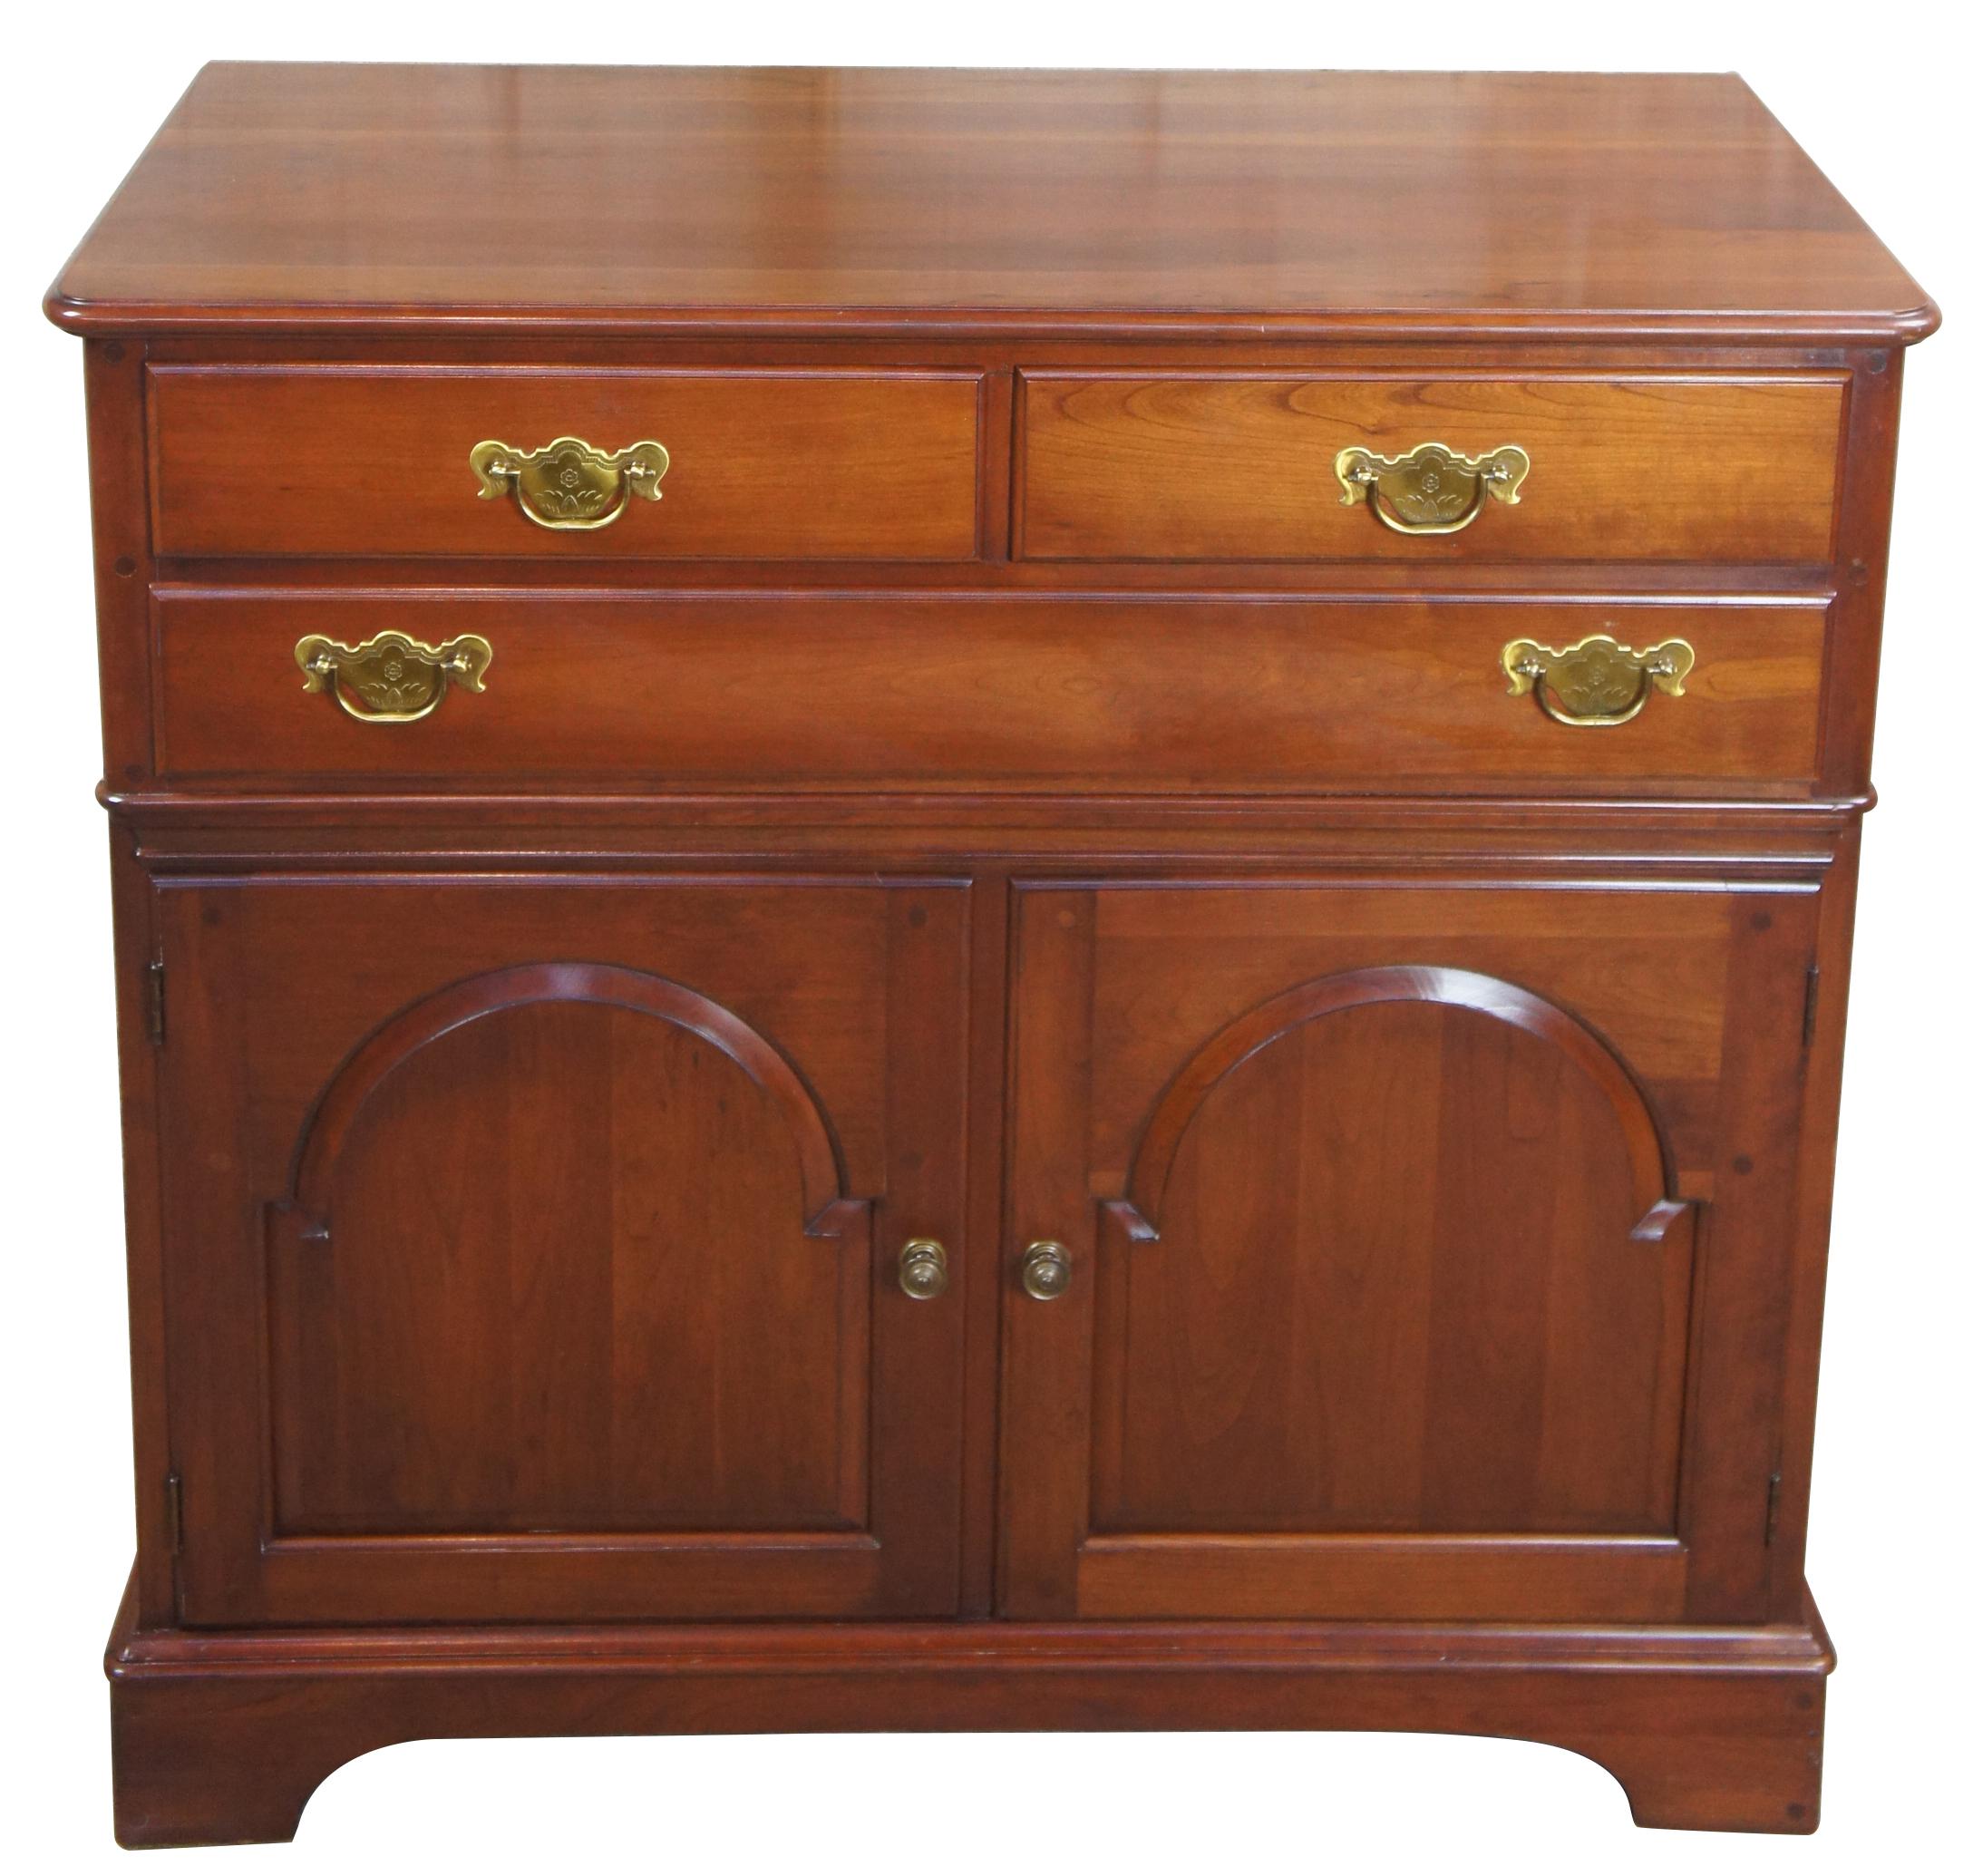 Vintage Pennsylvania House solid cherry traditional buffet server sideboard

Pennsylvania House 10-5538 cherry buffet or server, circa 1960s. Includes three drawers, lower cabinet with shelf and engraved brass hardware.
   